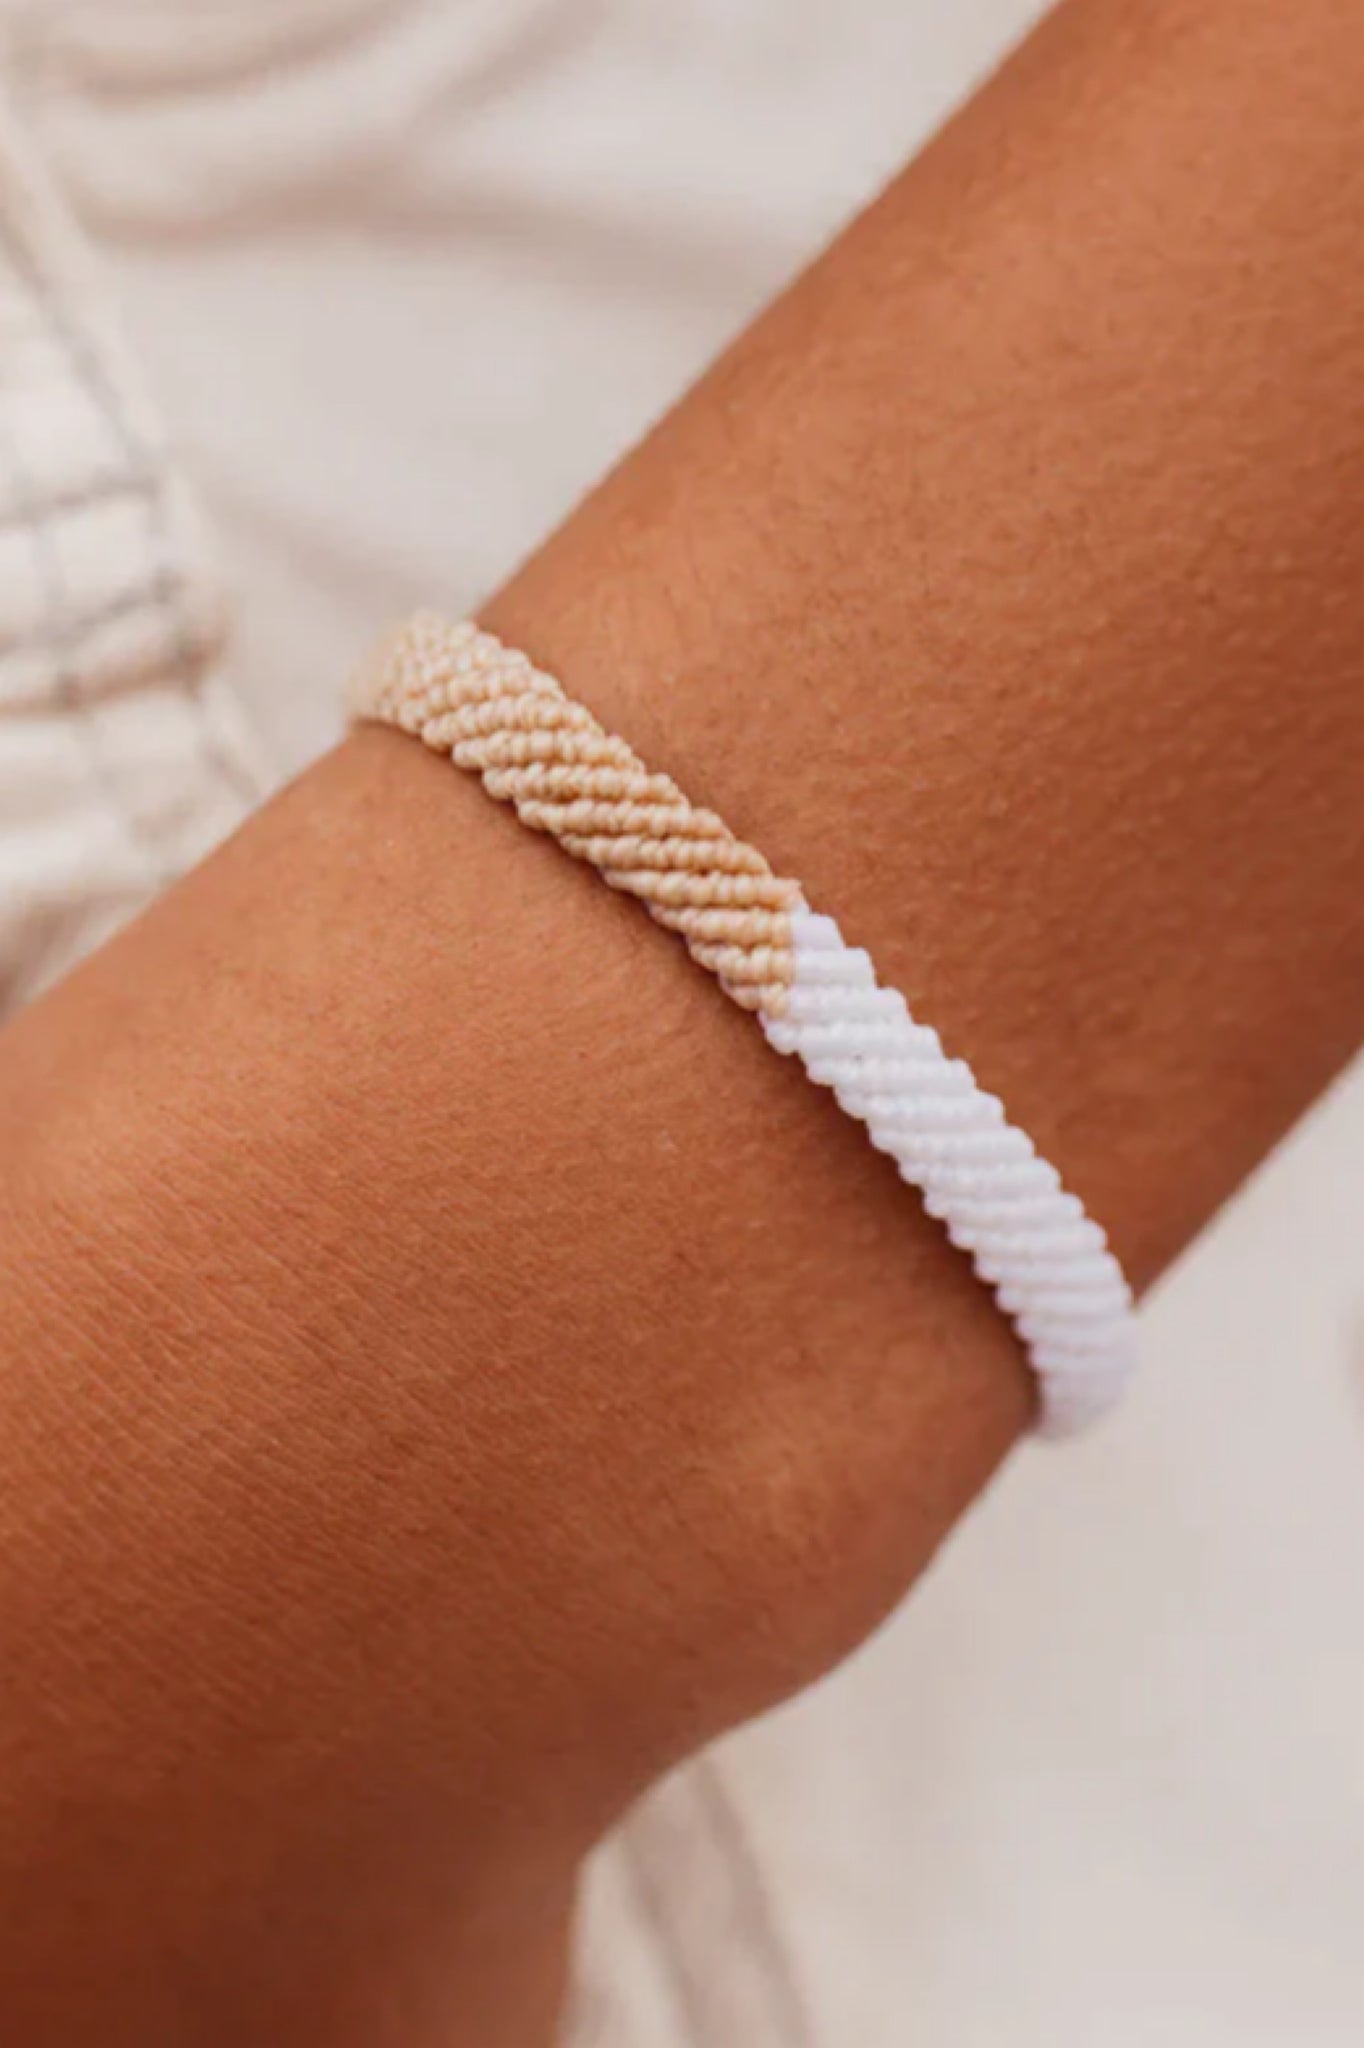 How to Make Friendship Bracelets With Names, Letters, and Numbers -  FeltMagnet